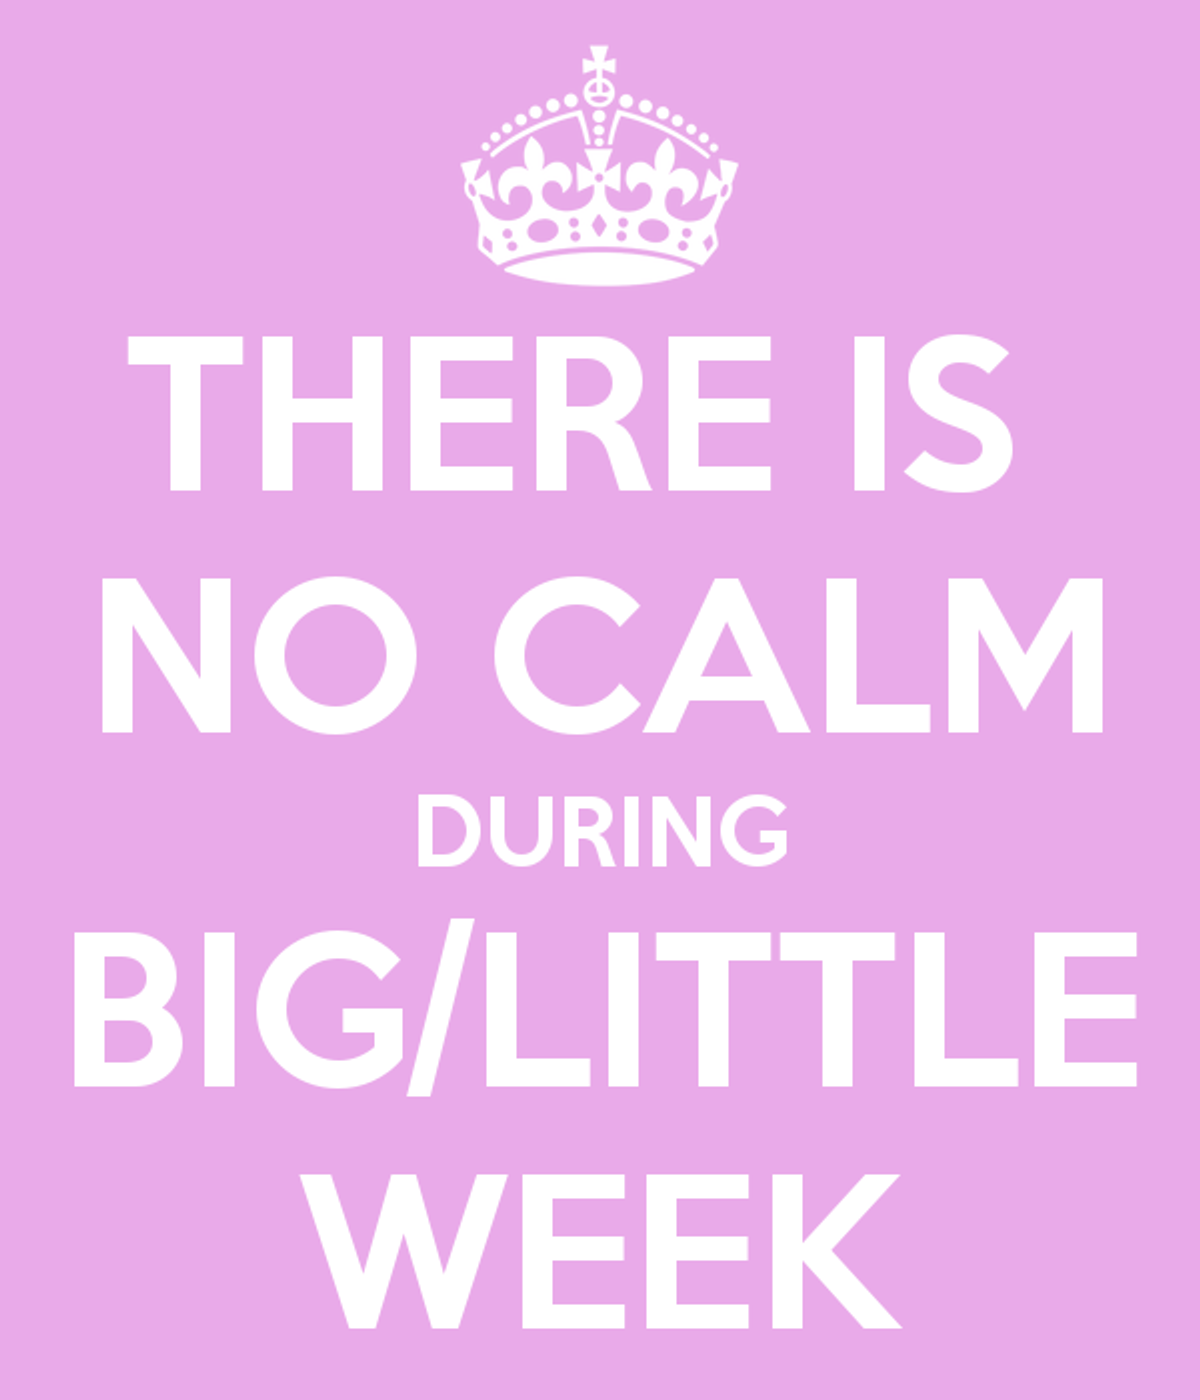 How to Organize the Best Big/Little Week Ever